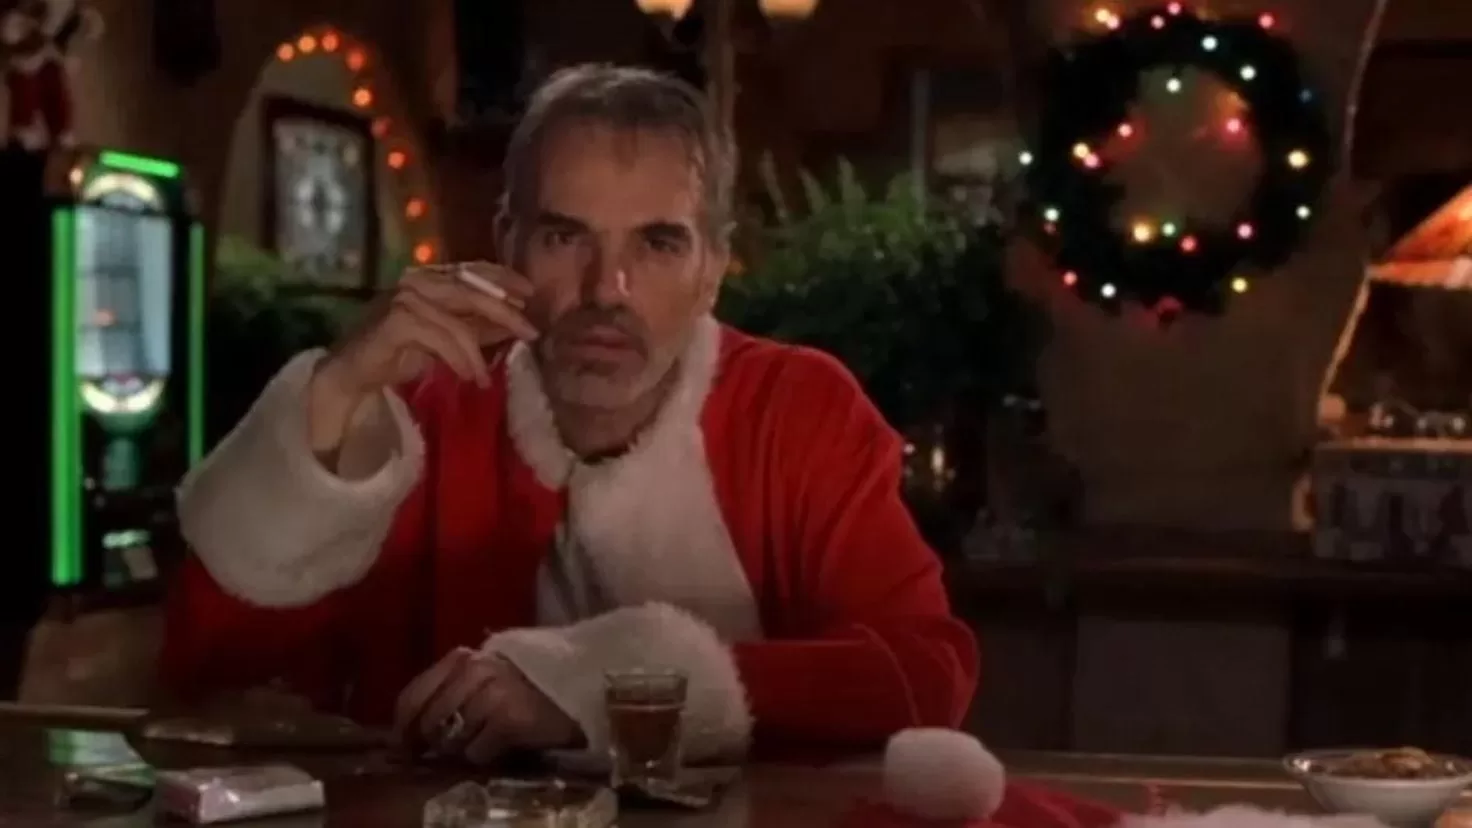 What happened to Billy Bob Thornton, the mythical Santa Claus from Bad Santa
